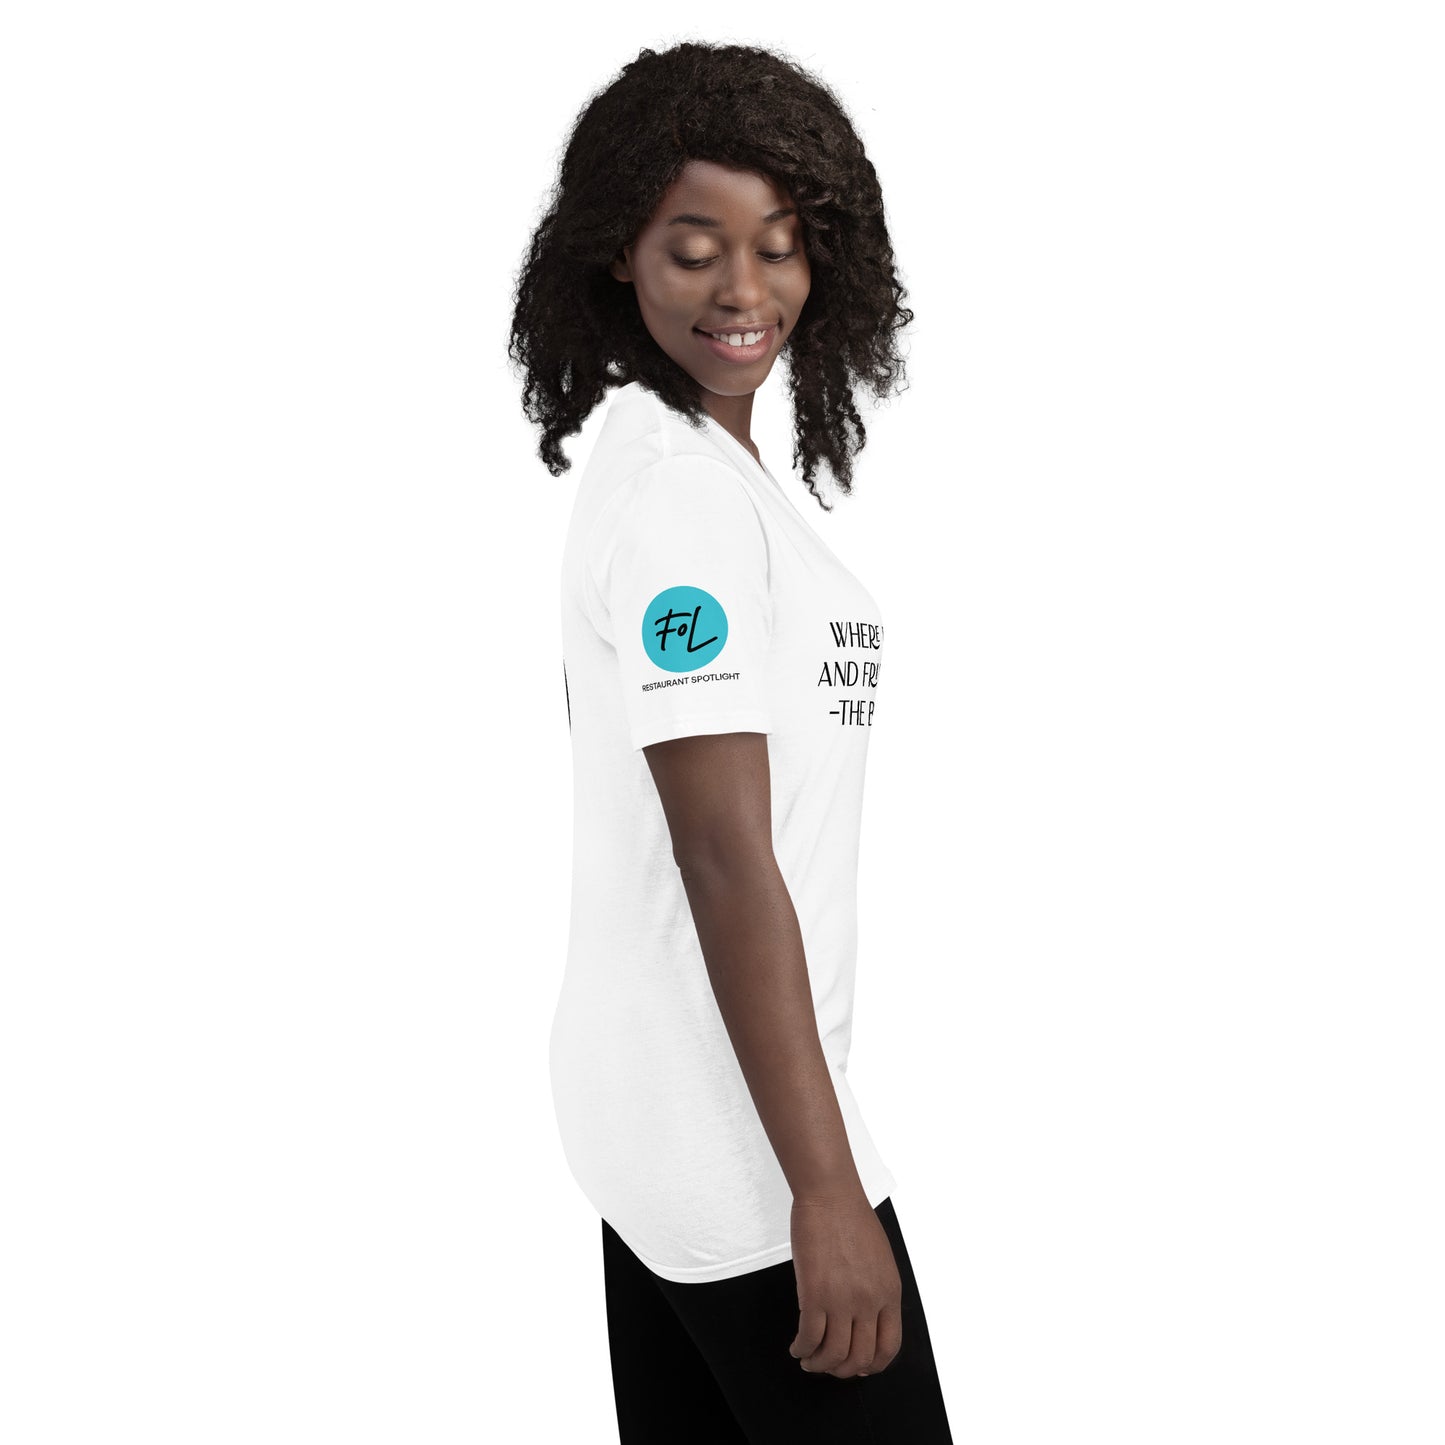 The Bus Stop Bistro Short-Sleeve T-Shirt